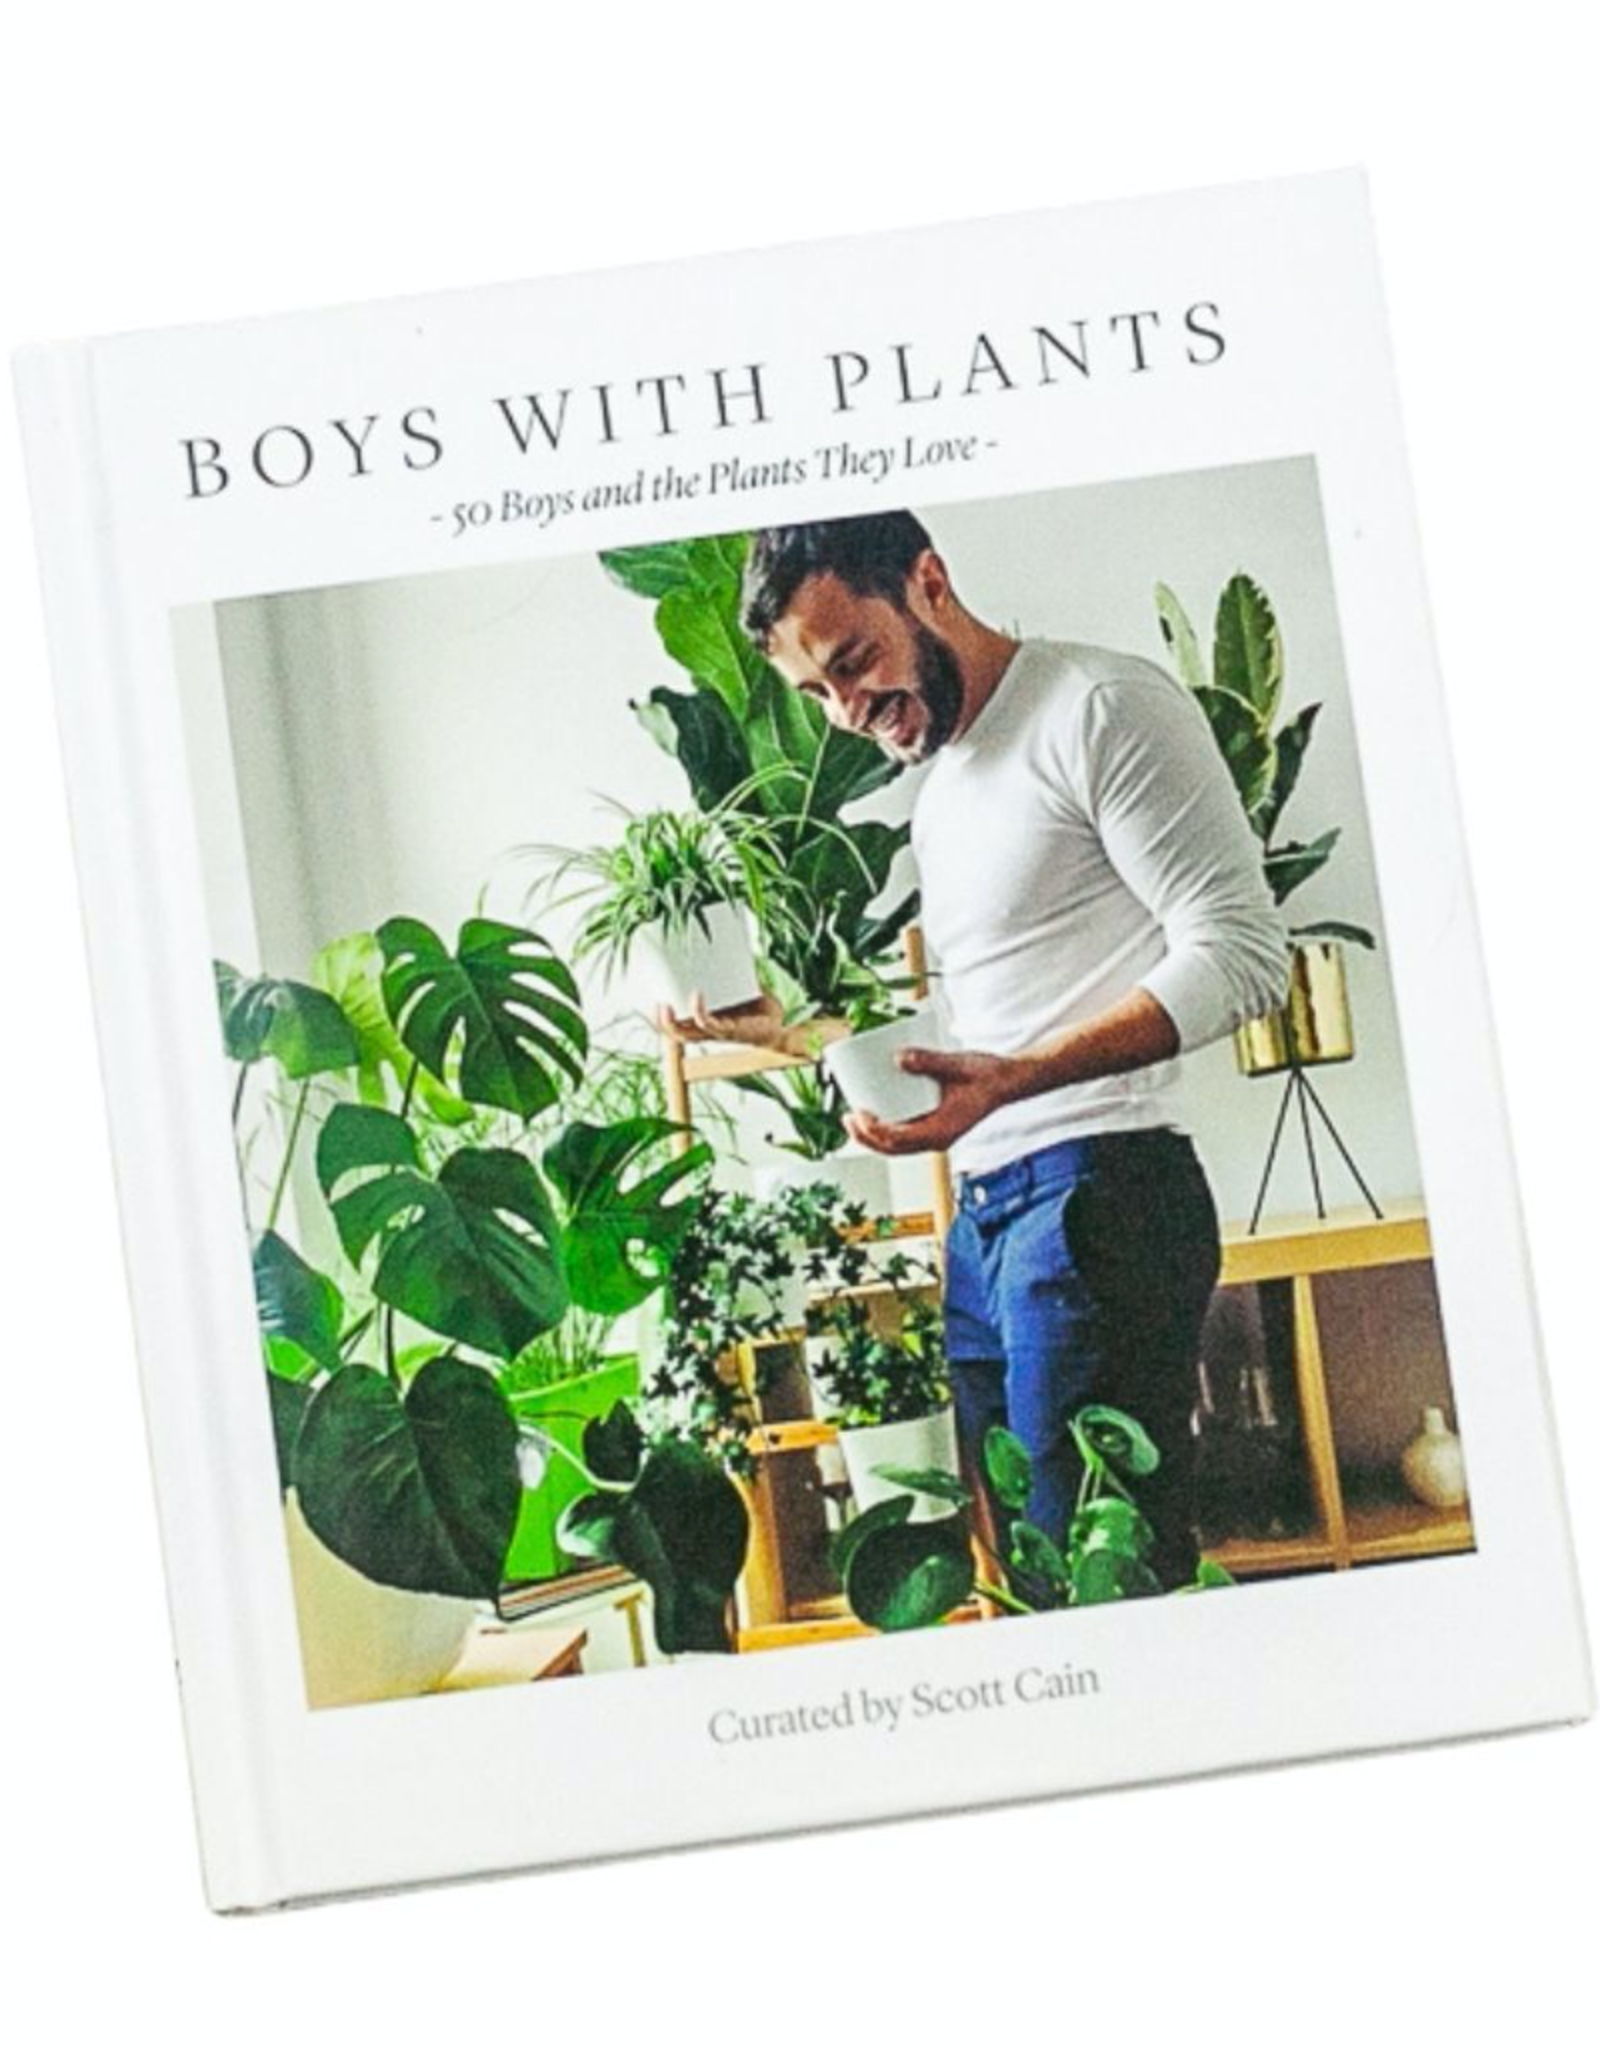 Boys With Plants